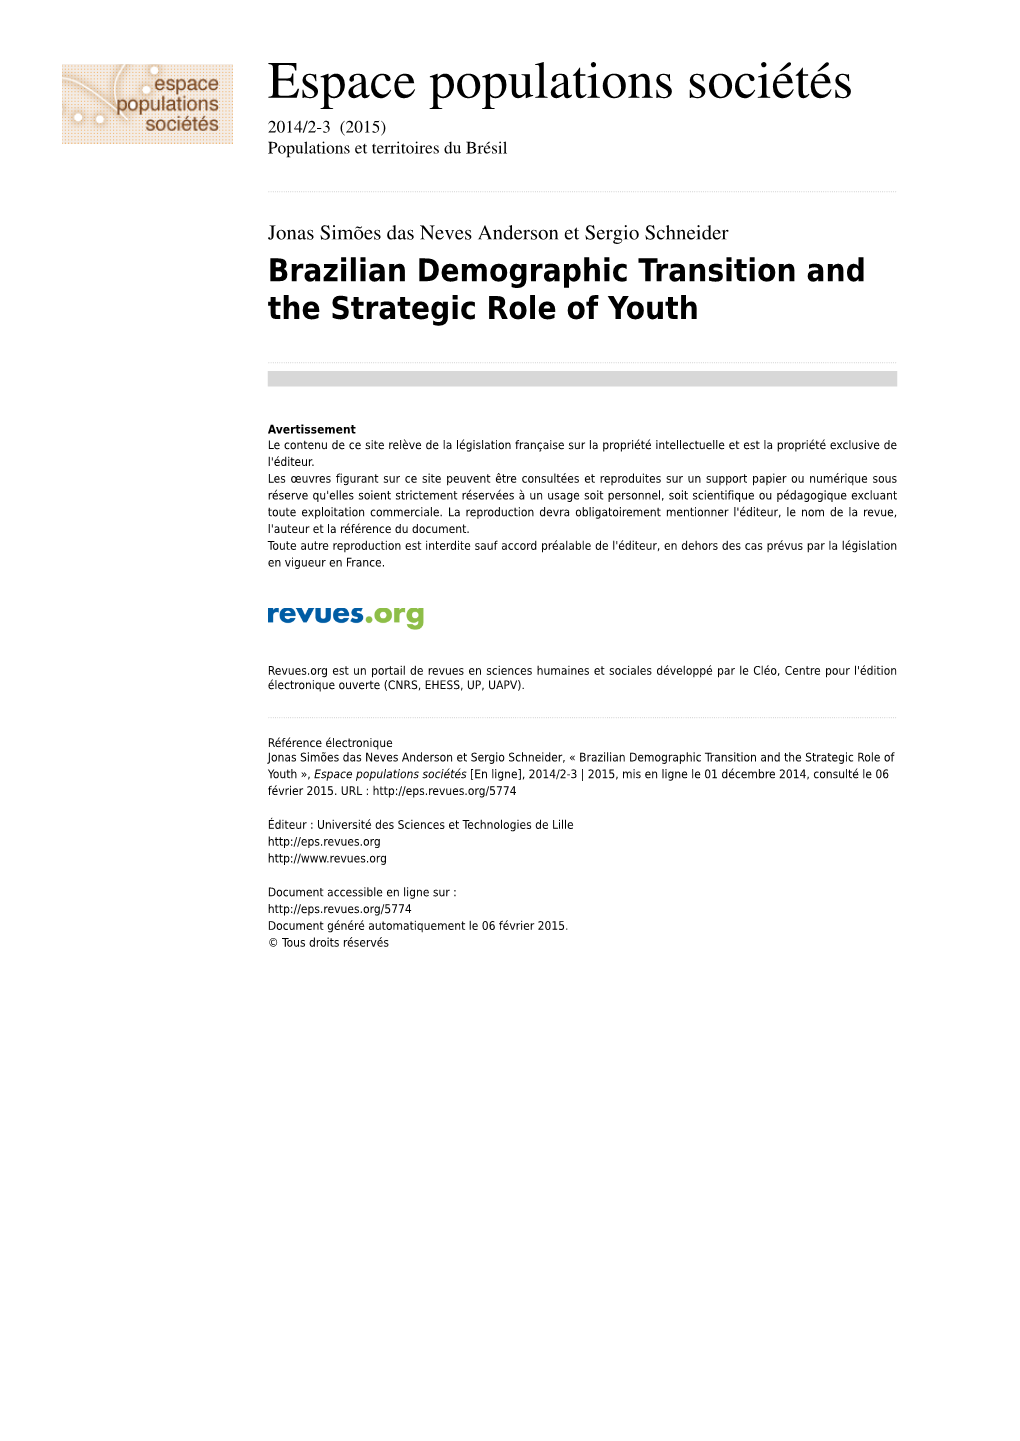 Brazilian Demographic Transition and the Strategic Role of Youth